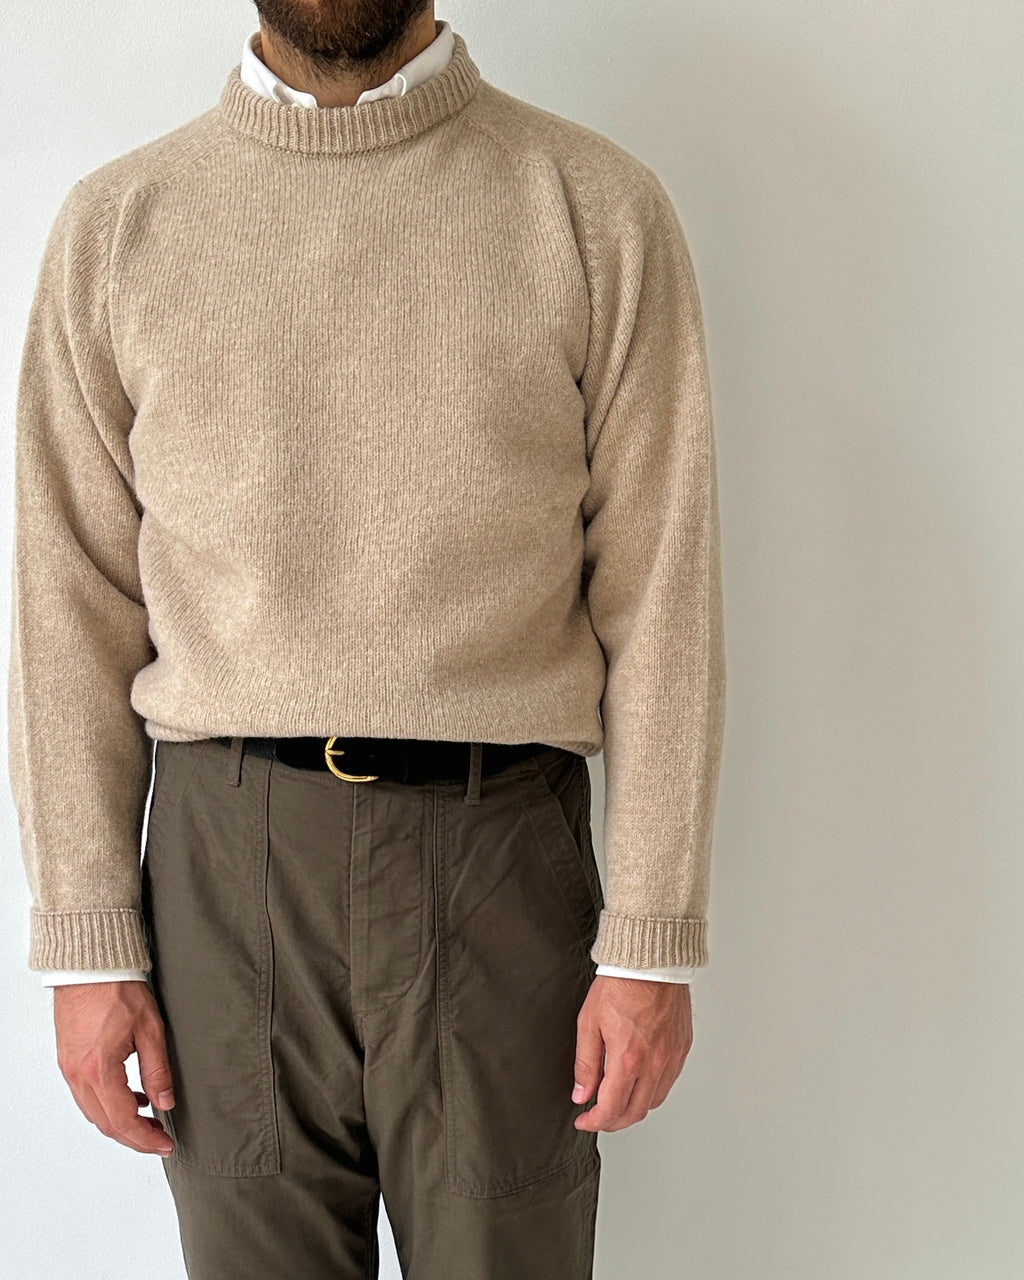 London-based clothing brand focused on relaxed, classic menswear ...